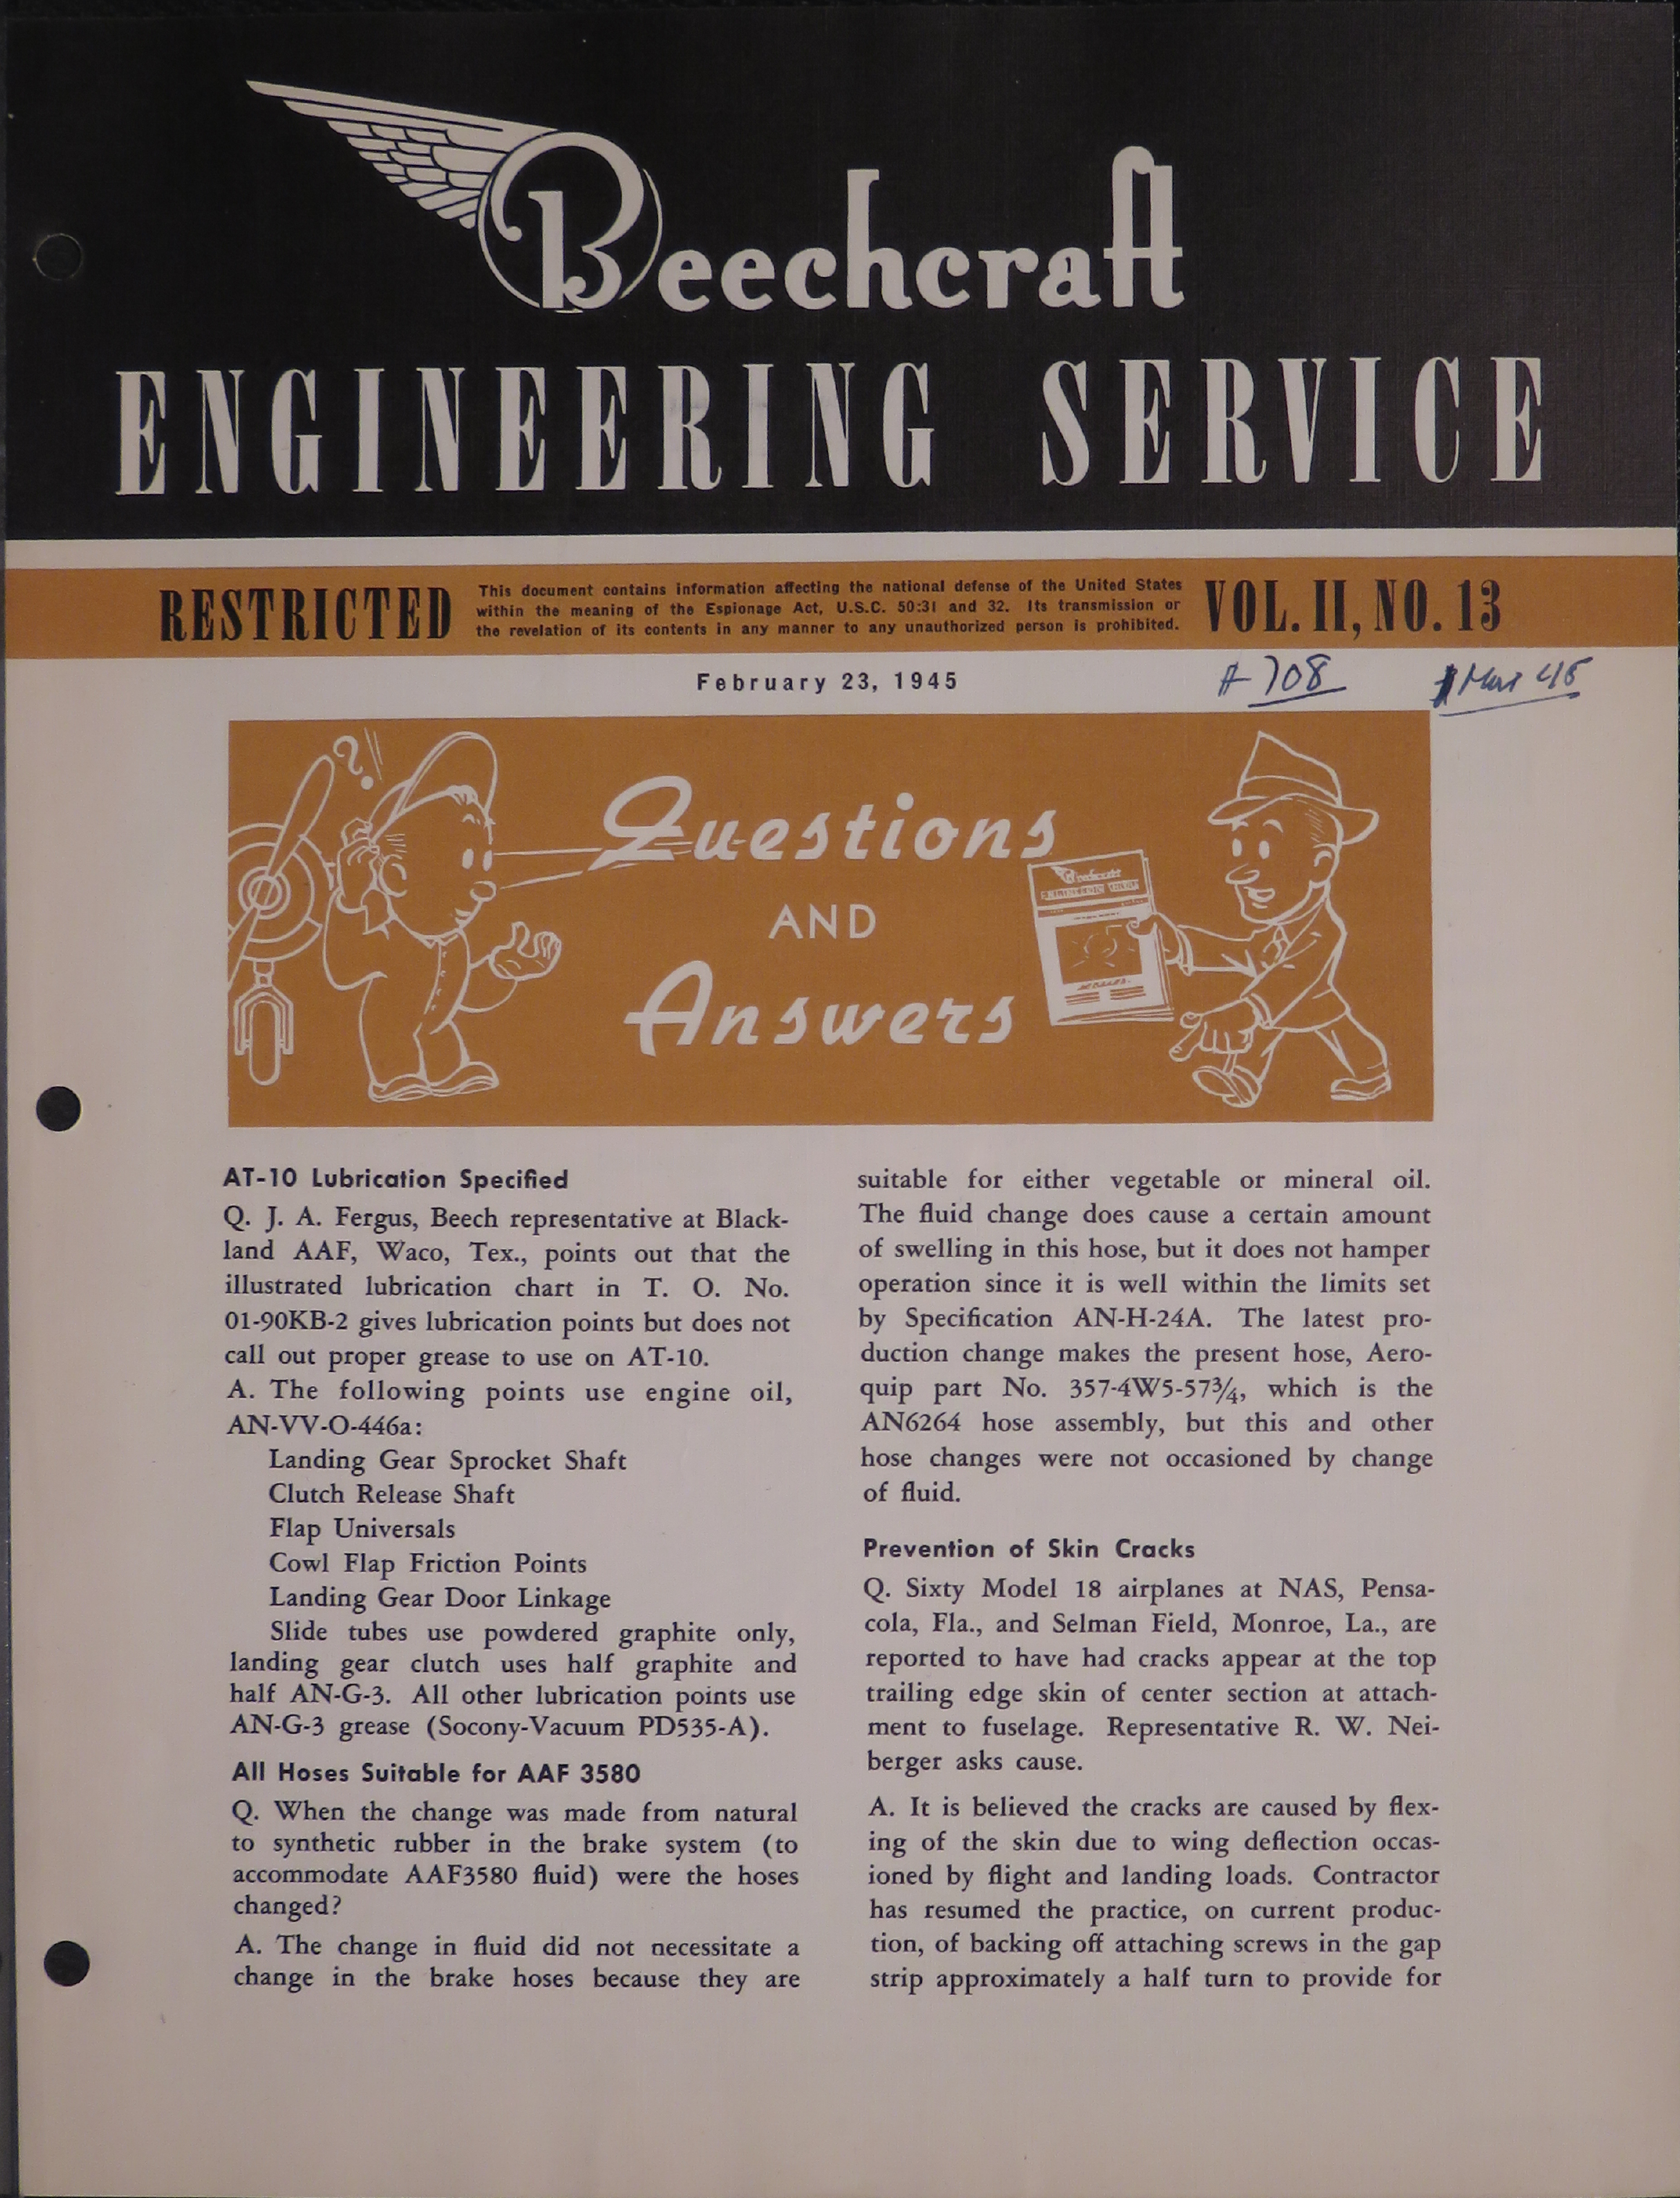 Sample page 1 from AirCorps Library document: Vol. II, No. 13 - Beechcraft Engineering Service